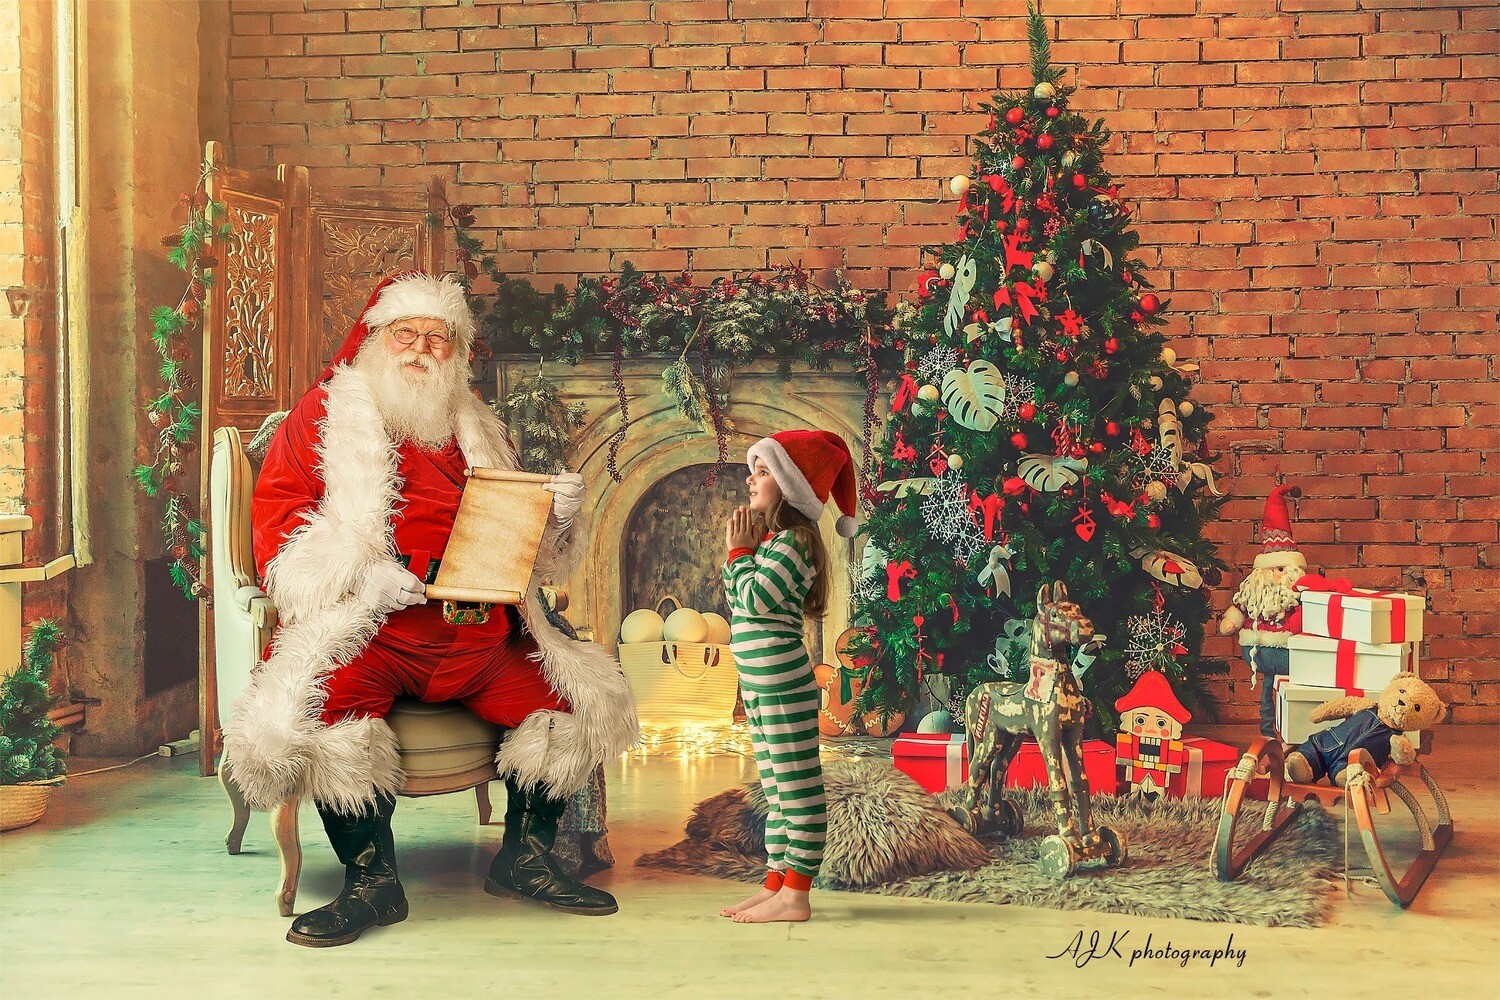 Santa in Chair in Warm Room Reading Naughty or Nice List by Fireplace - Santa with Scroll - The Good List - Christmas Holiday Digital Background Backdrop